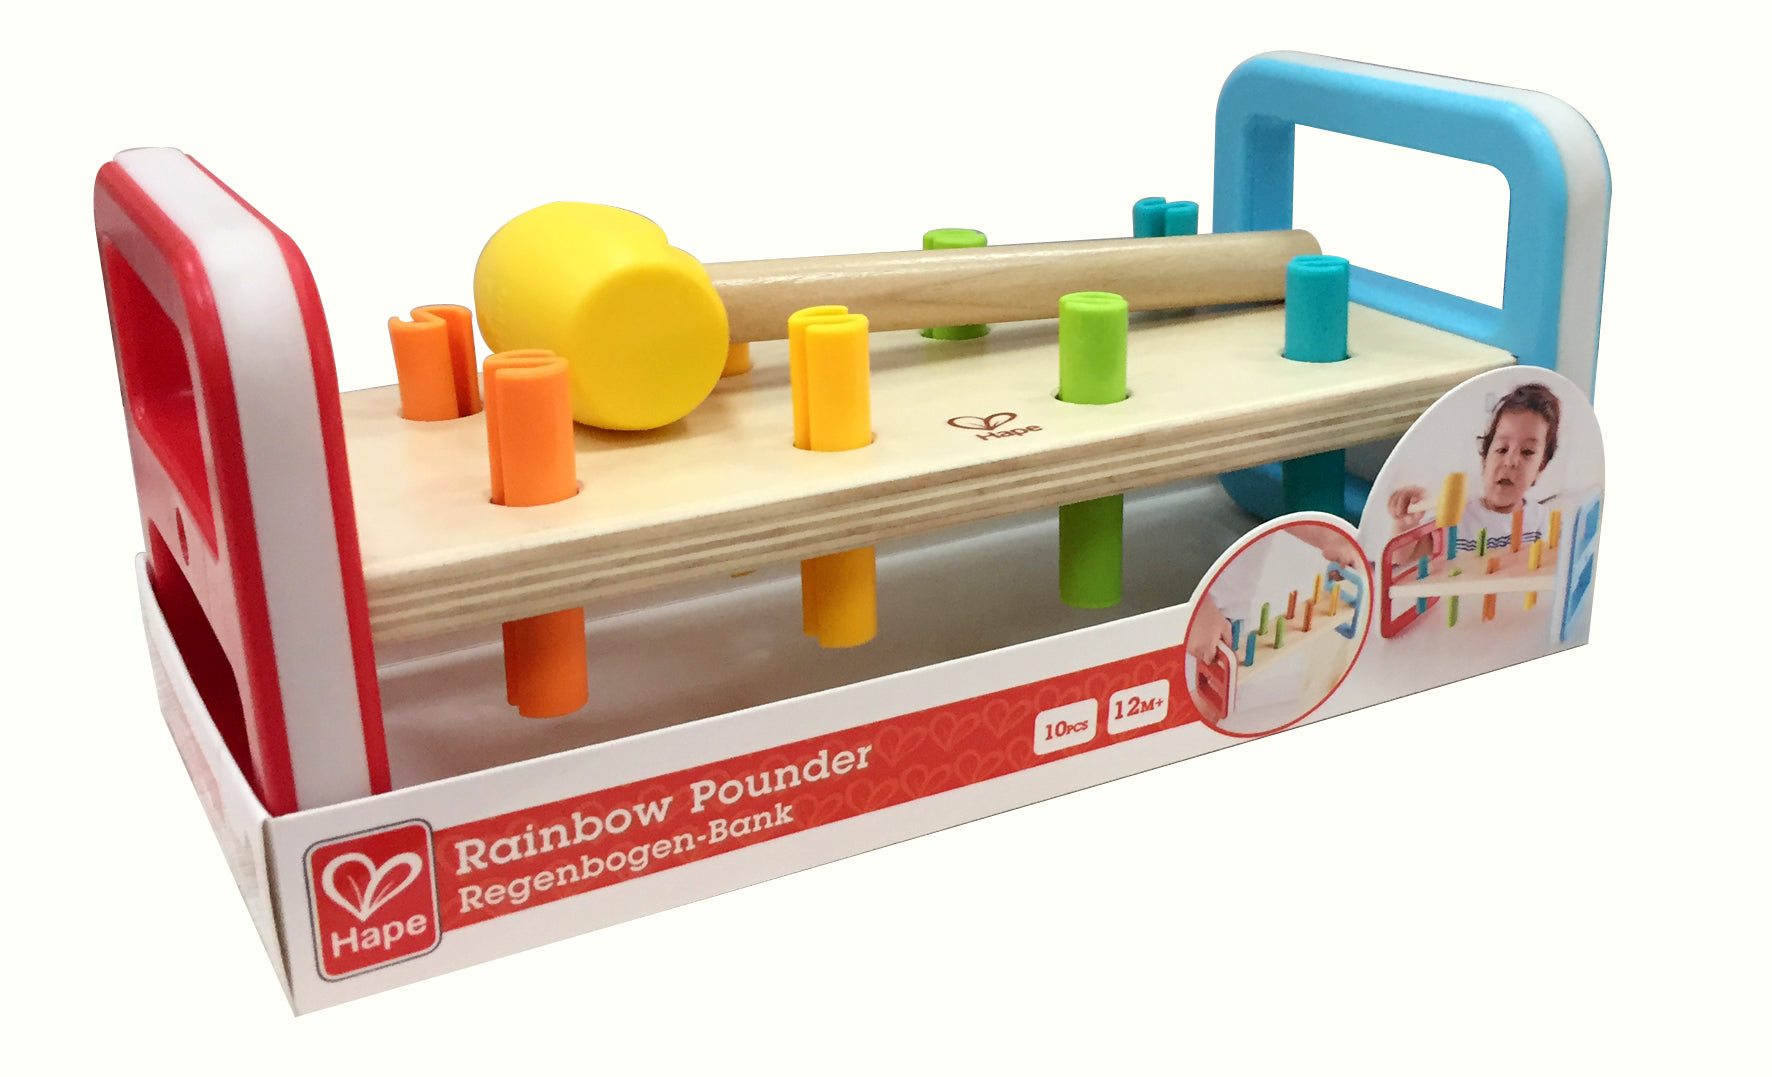 Hape Rainbow Pounder teaches kids about colors and counting The Toy Wagon